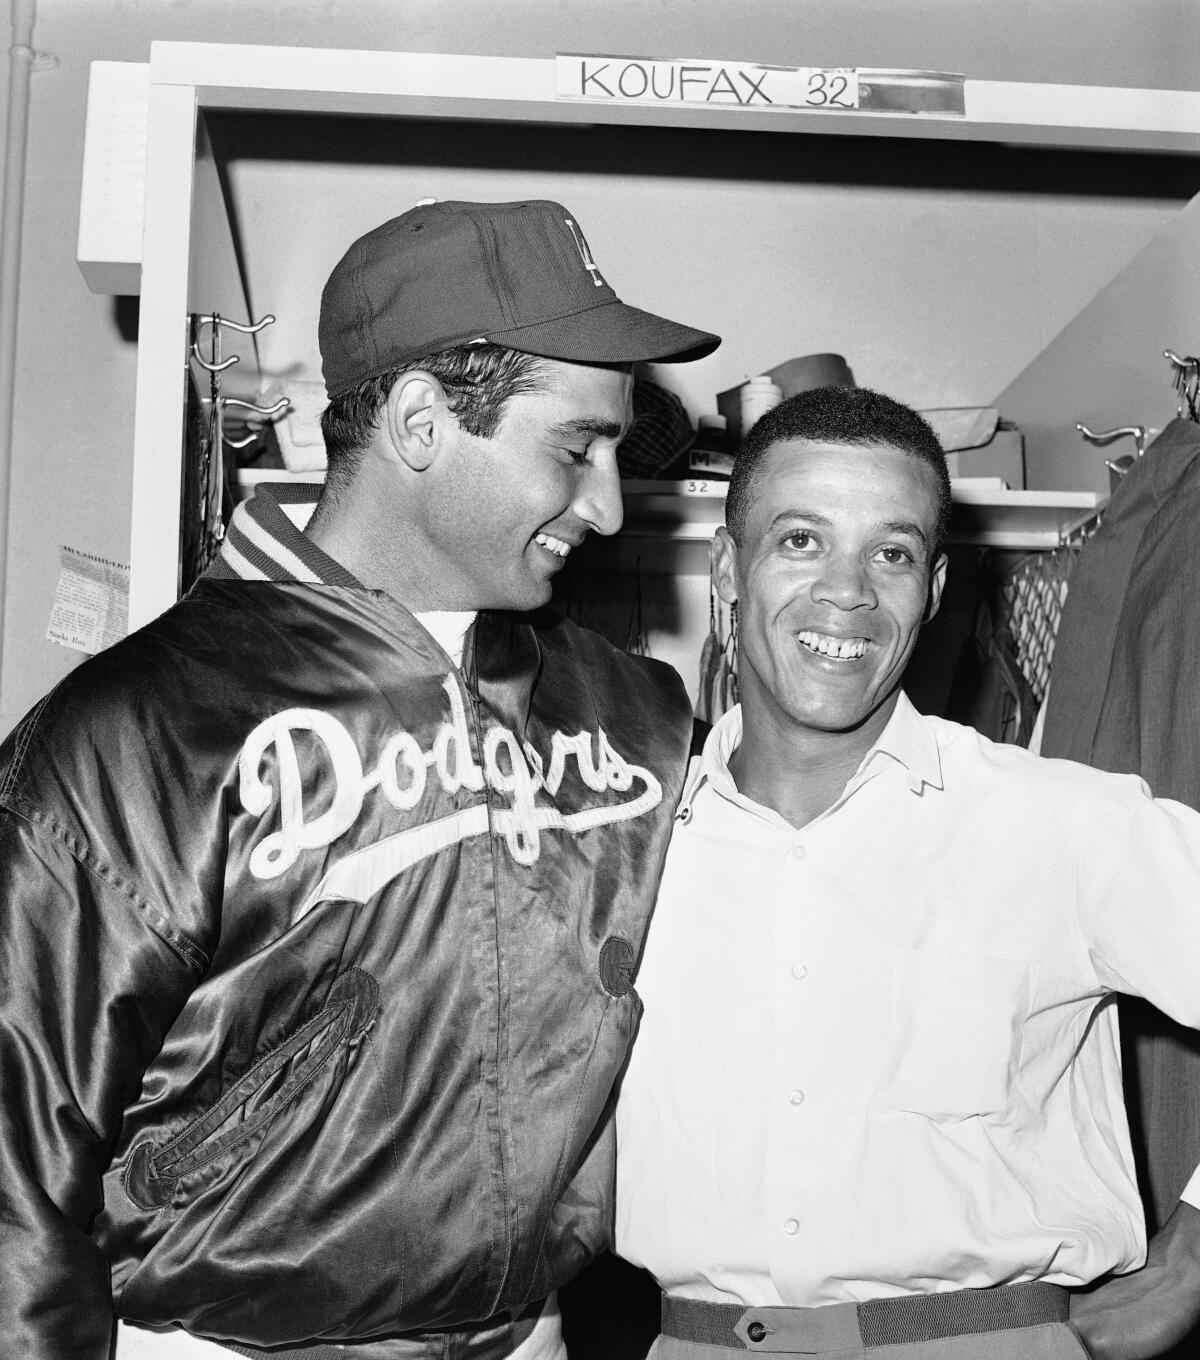 Sandy Koufax smiles at Maury Wills while the two stand together in the locker room.